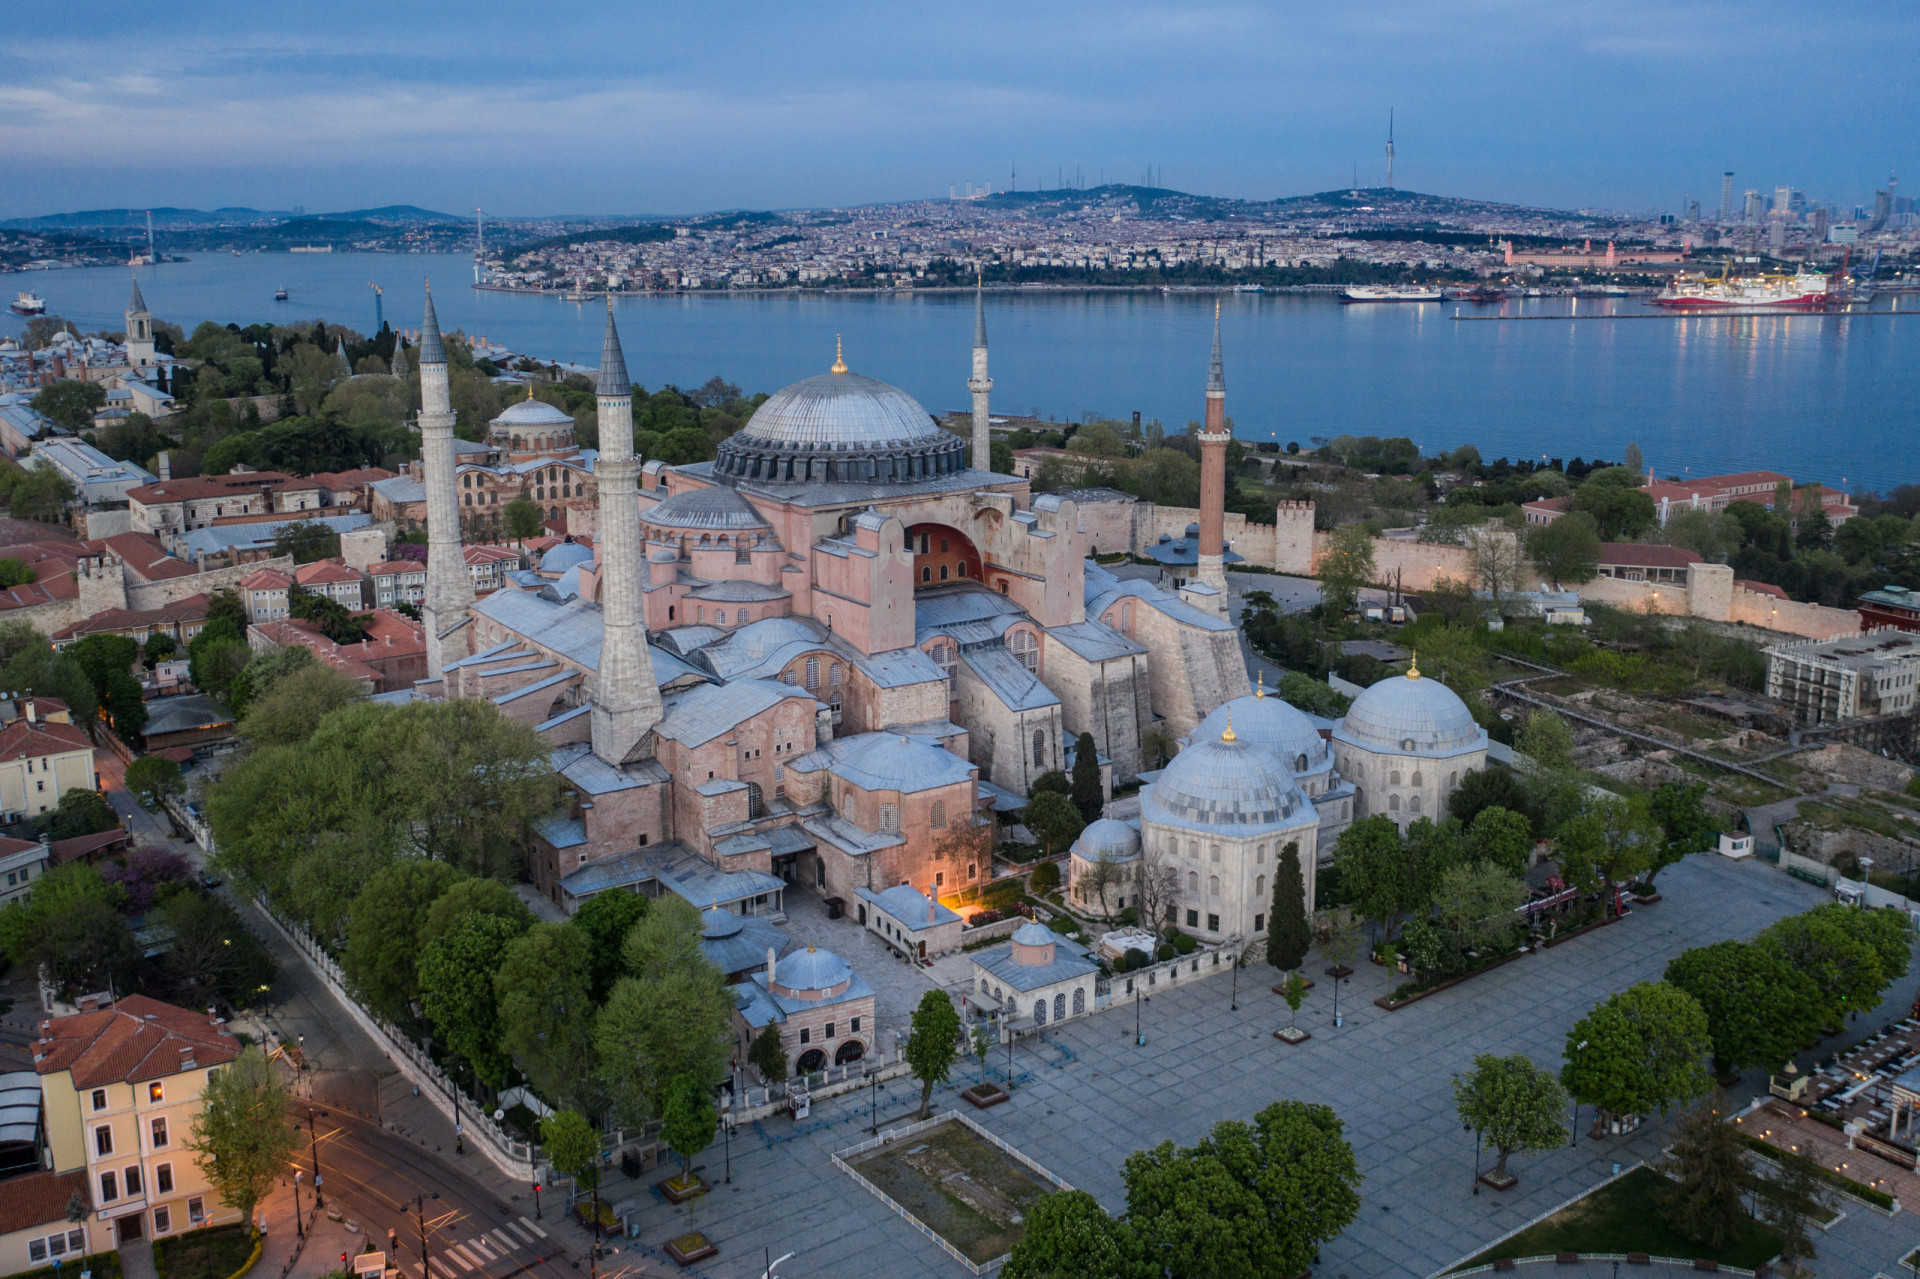 <p>Once an important place of worship for both Christians and Muslims, the Hagia Sophia in Istanbul was built in 537 BCE as an Eastern Orthodox cathedral. It was later converted into a mosque in 1453, and served as such until 1931. In 1935, the building was secularized and became a museum.</p><p>You may also like:<a href="https://www.starsinsider.com/n/493584?utm_source=msn.com&utm_medium=display&utm_campaign=referral_description&utm_content=524487en-us"> Myths about belly fat that need to get debunked</a></p>